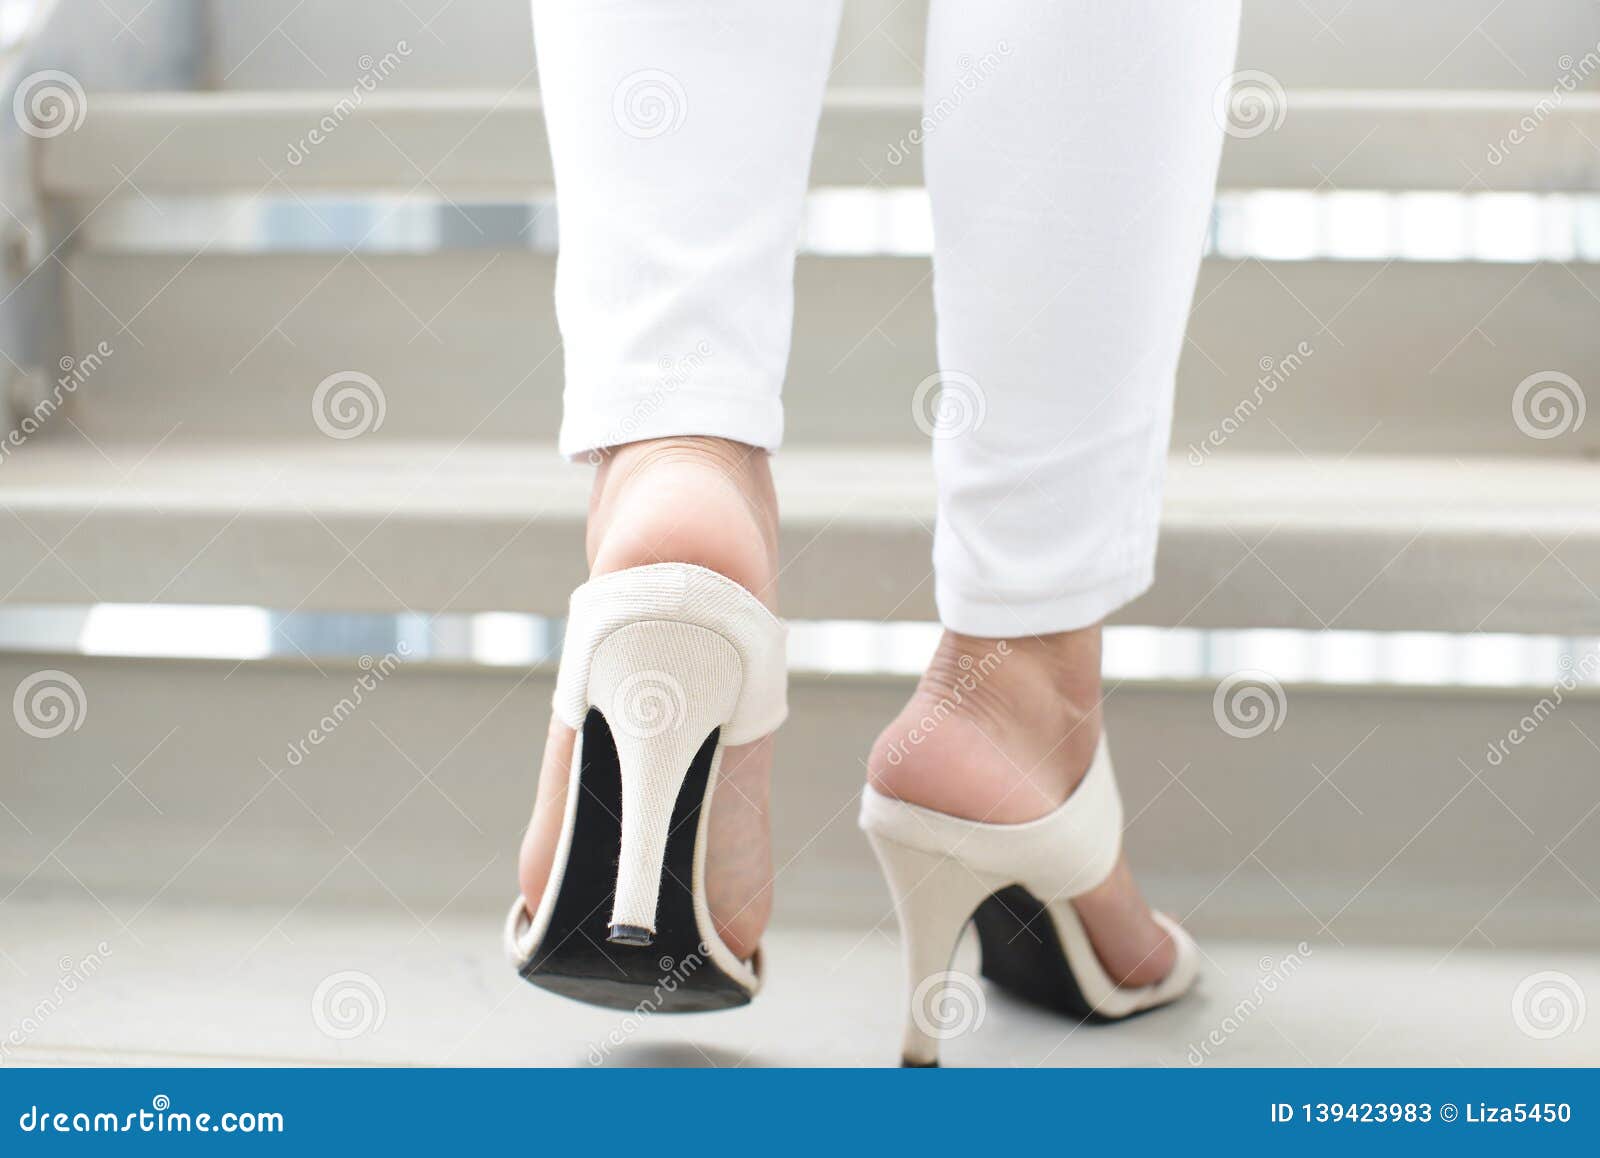 Woman Legs in Fashionable High Heel Sandals Stock Image - Image of ...